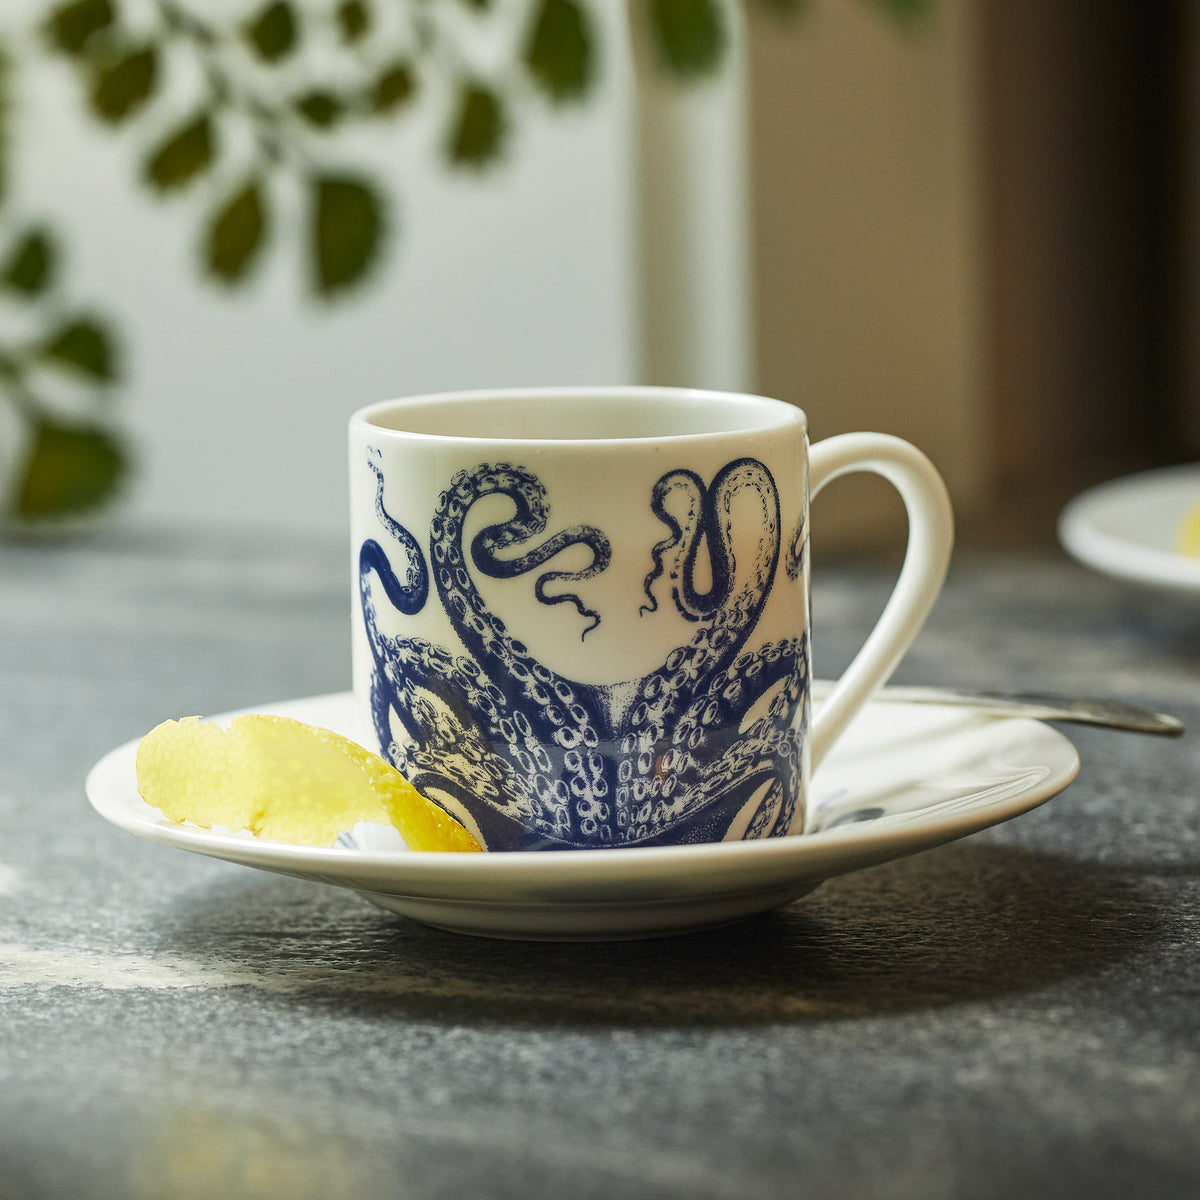 Lucy the Octopus Espresso Cups and Saucers in Blue and White bone china from Caskata sold as a set of 2